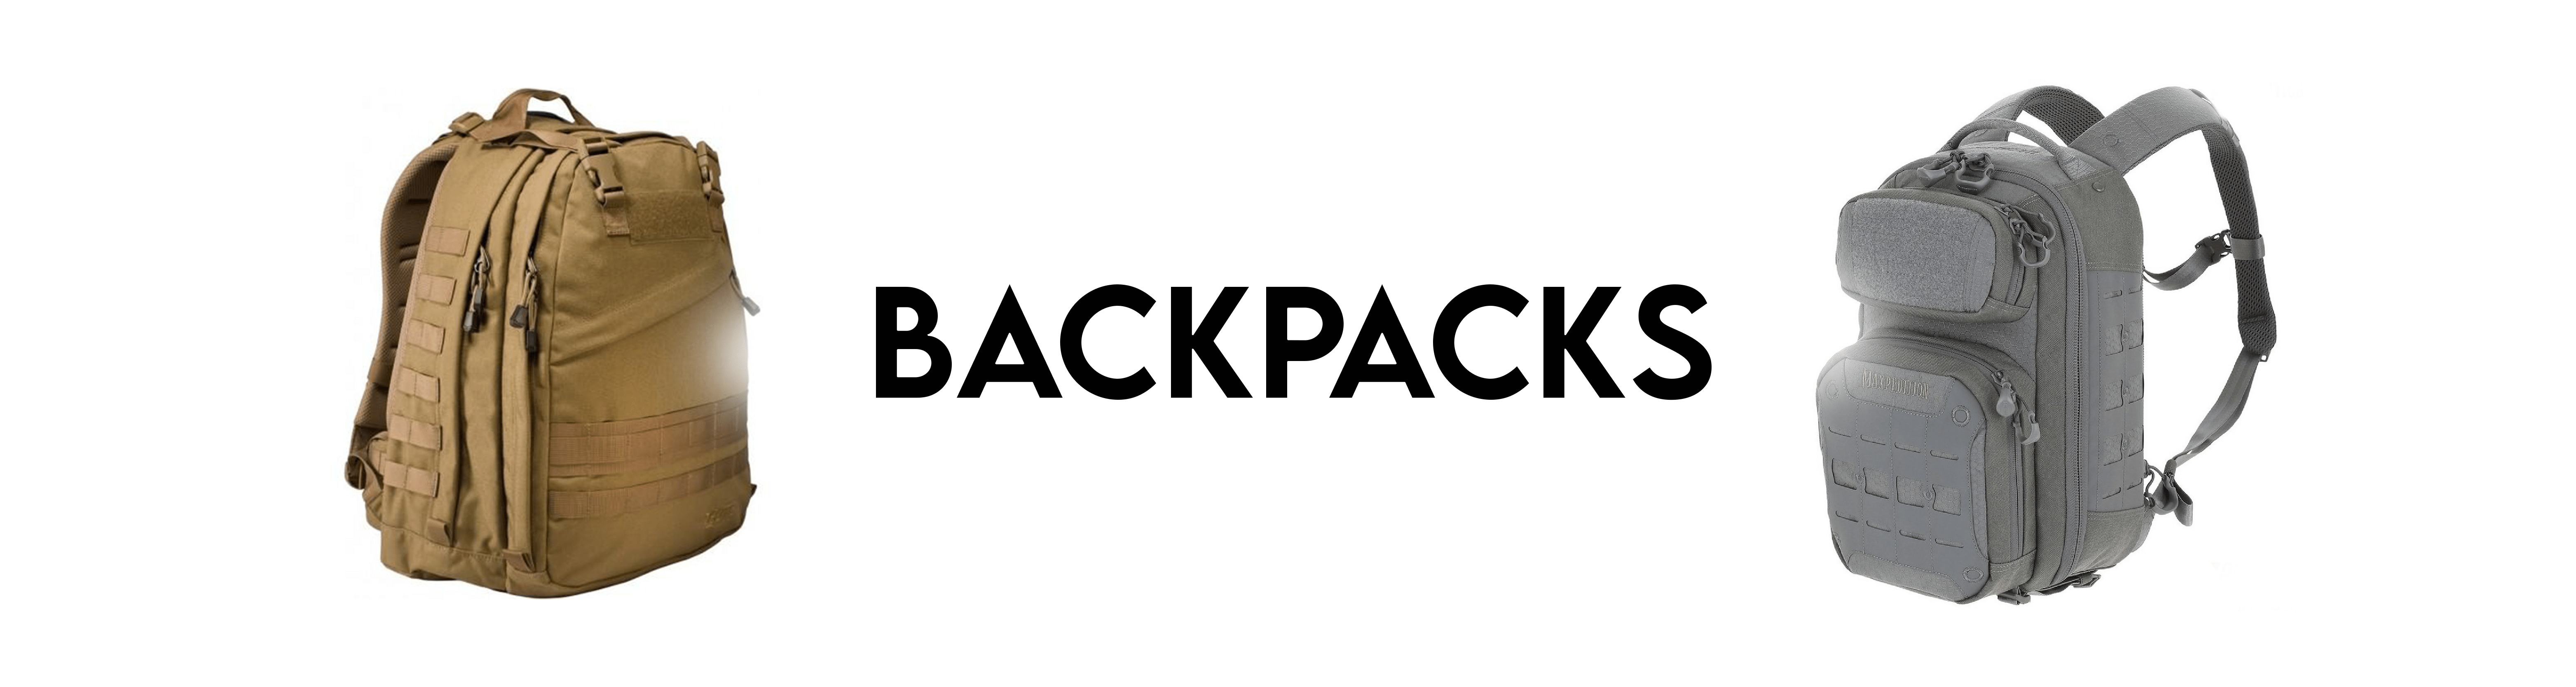 Backpacks - Recreation Outfitters